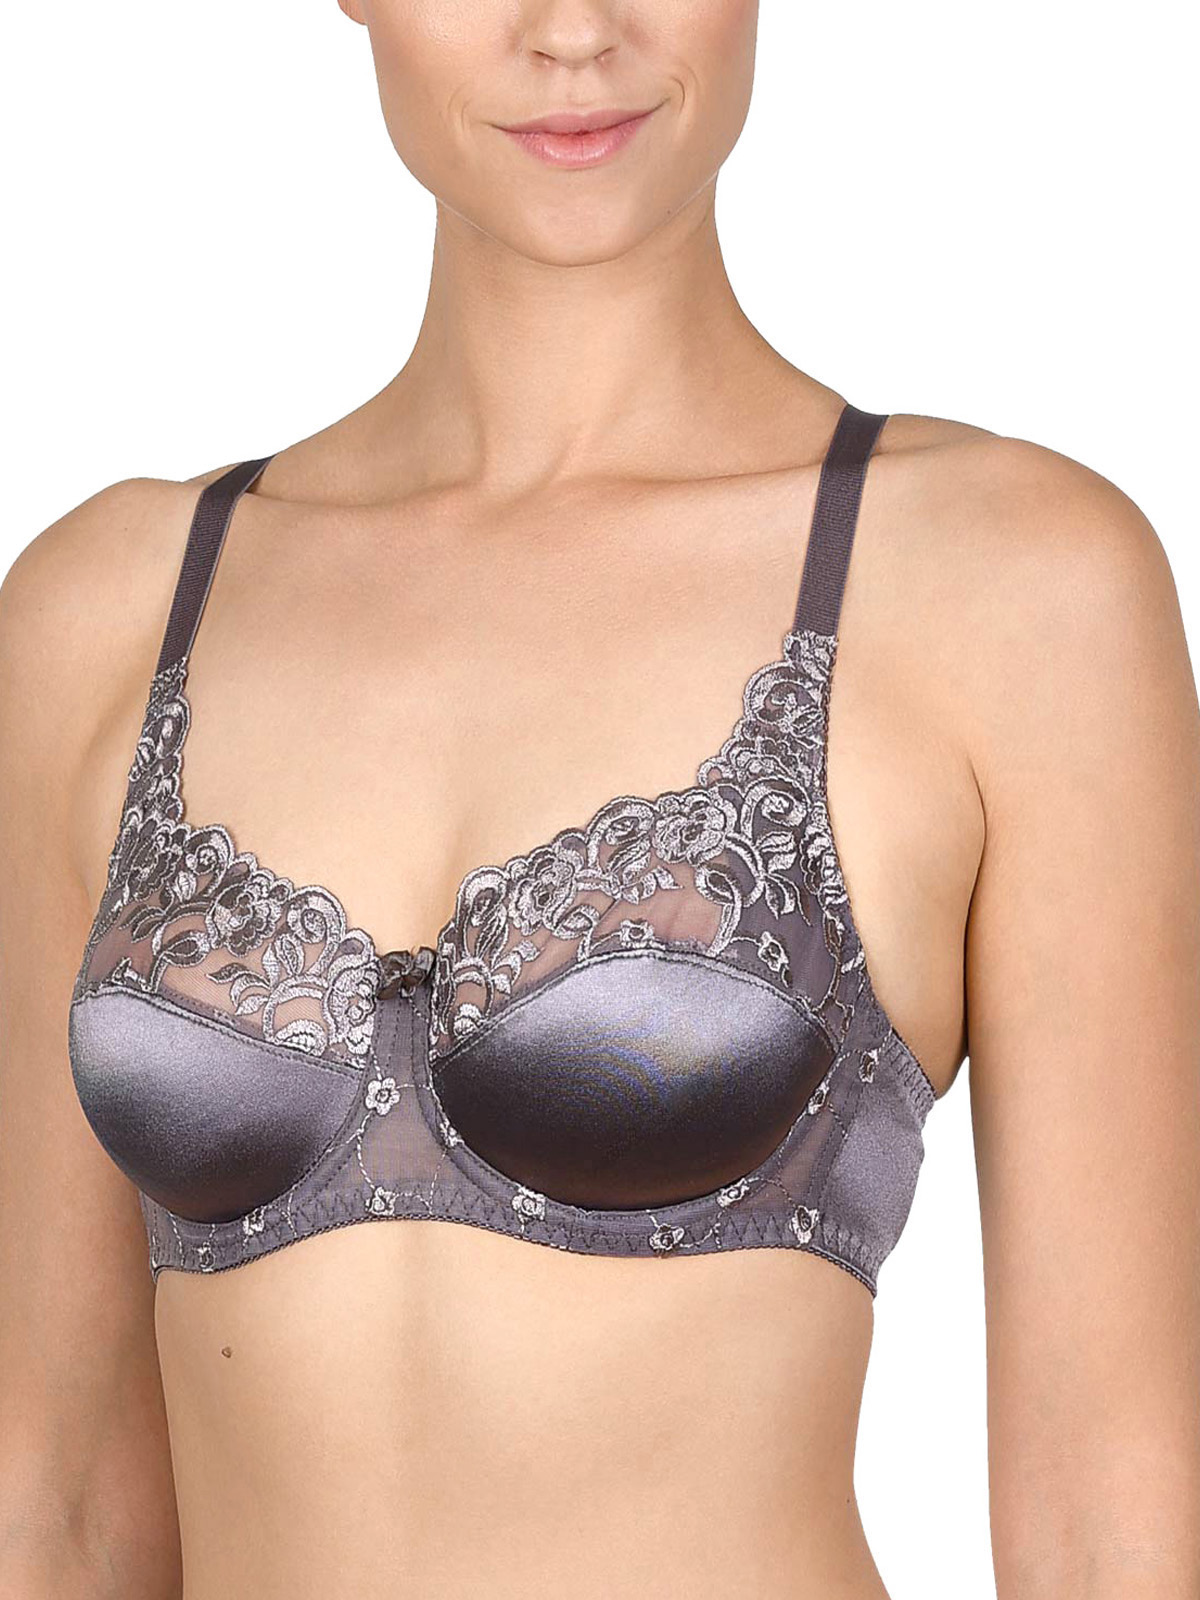 Naturana - - Naturana GREY SILK Embroidered Tulle Lace Underwired